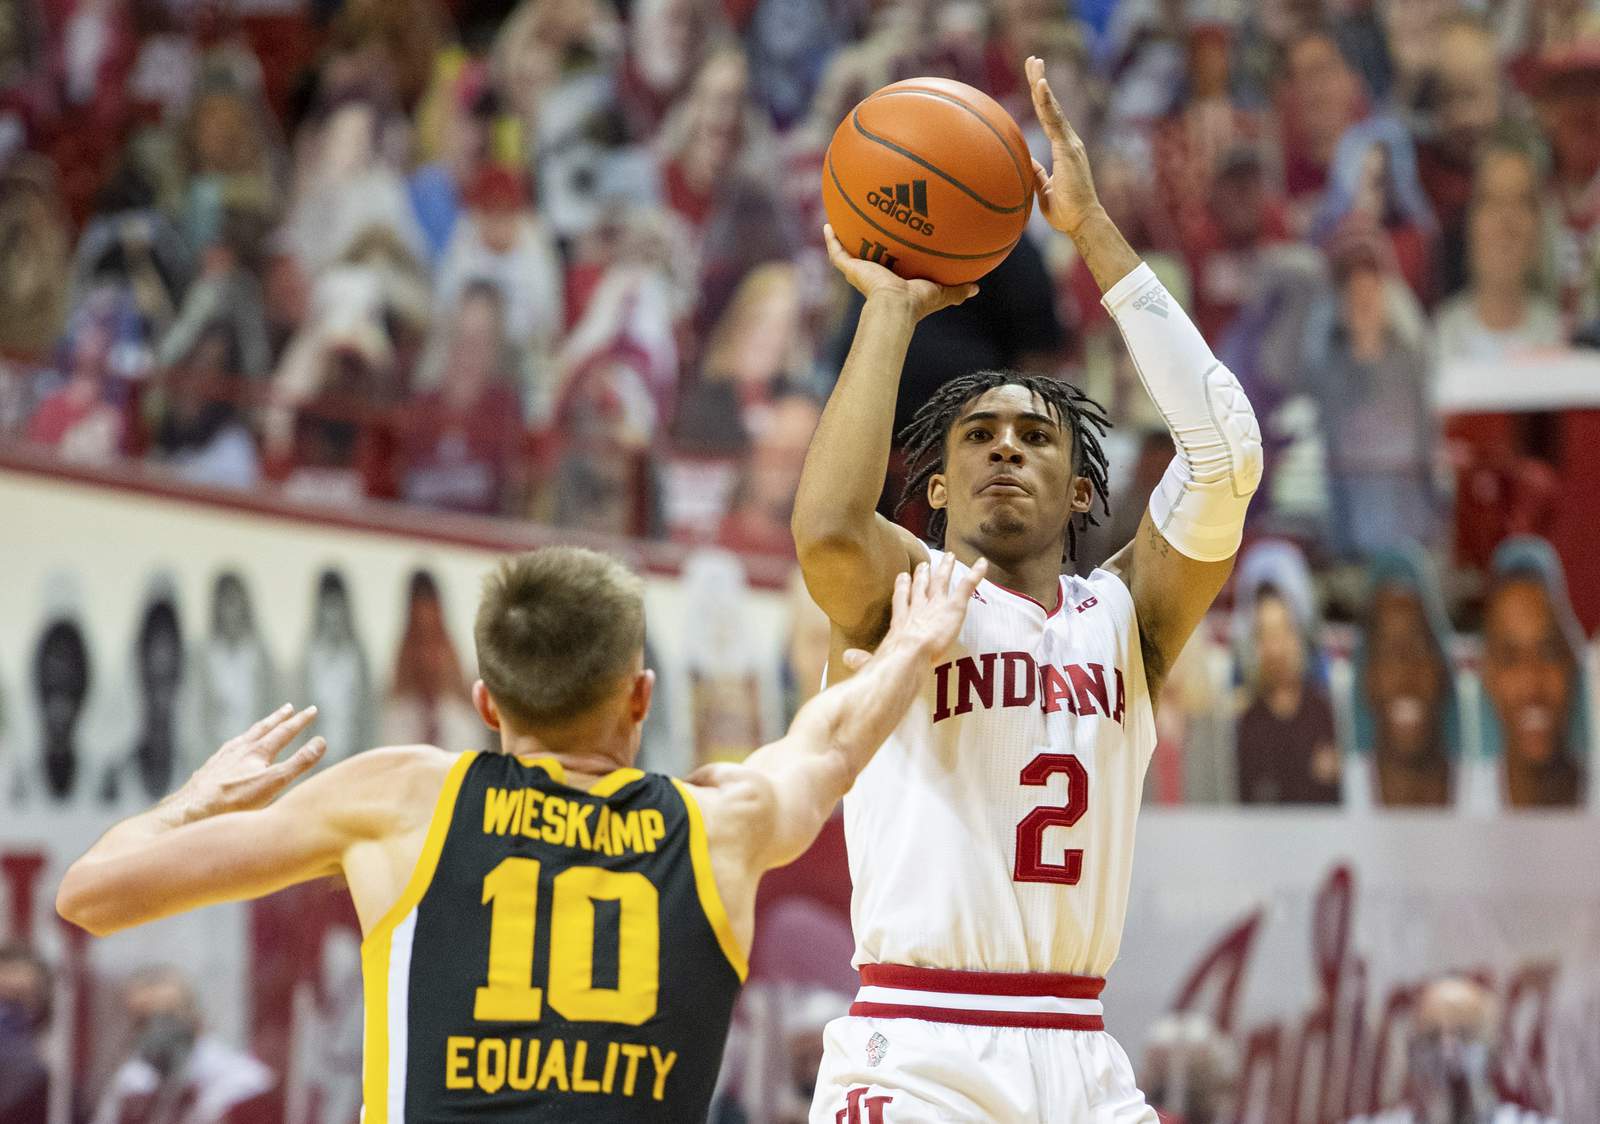 Franklin's late shot sends Indiana past No. 8 Iowa 67-65